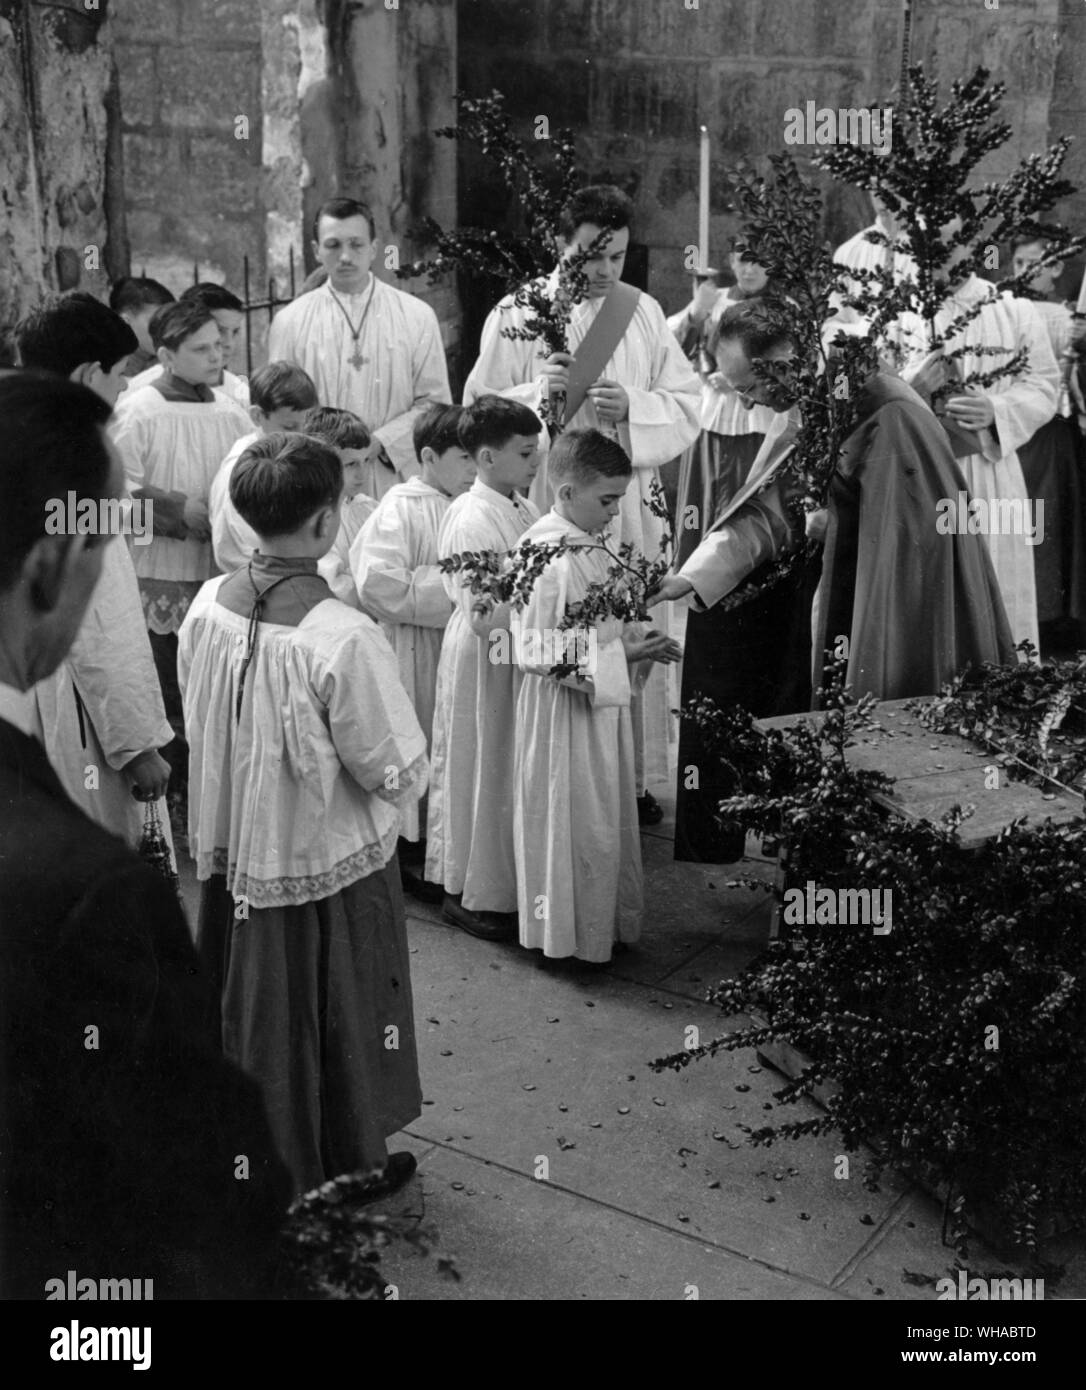 On Palm Sunday the whole congregation goes in Procession carrying palms in memory of Christ's entry into Jerusalem. Branches of local shrubs are often carried instead of the palm leaves Stock Photo